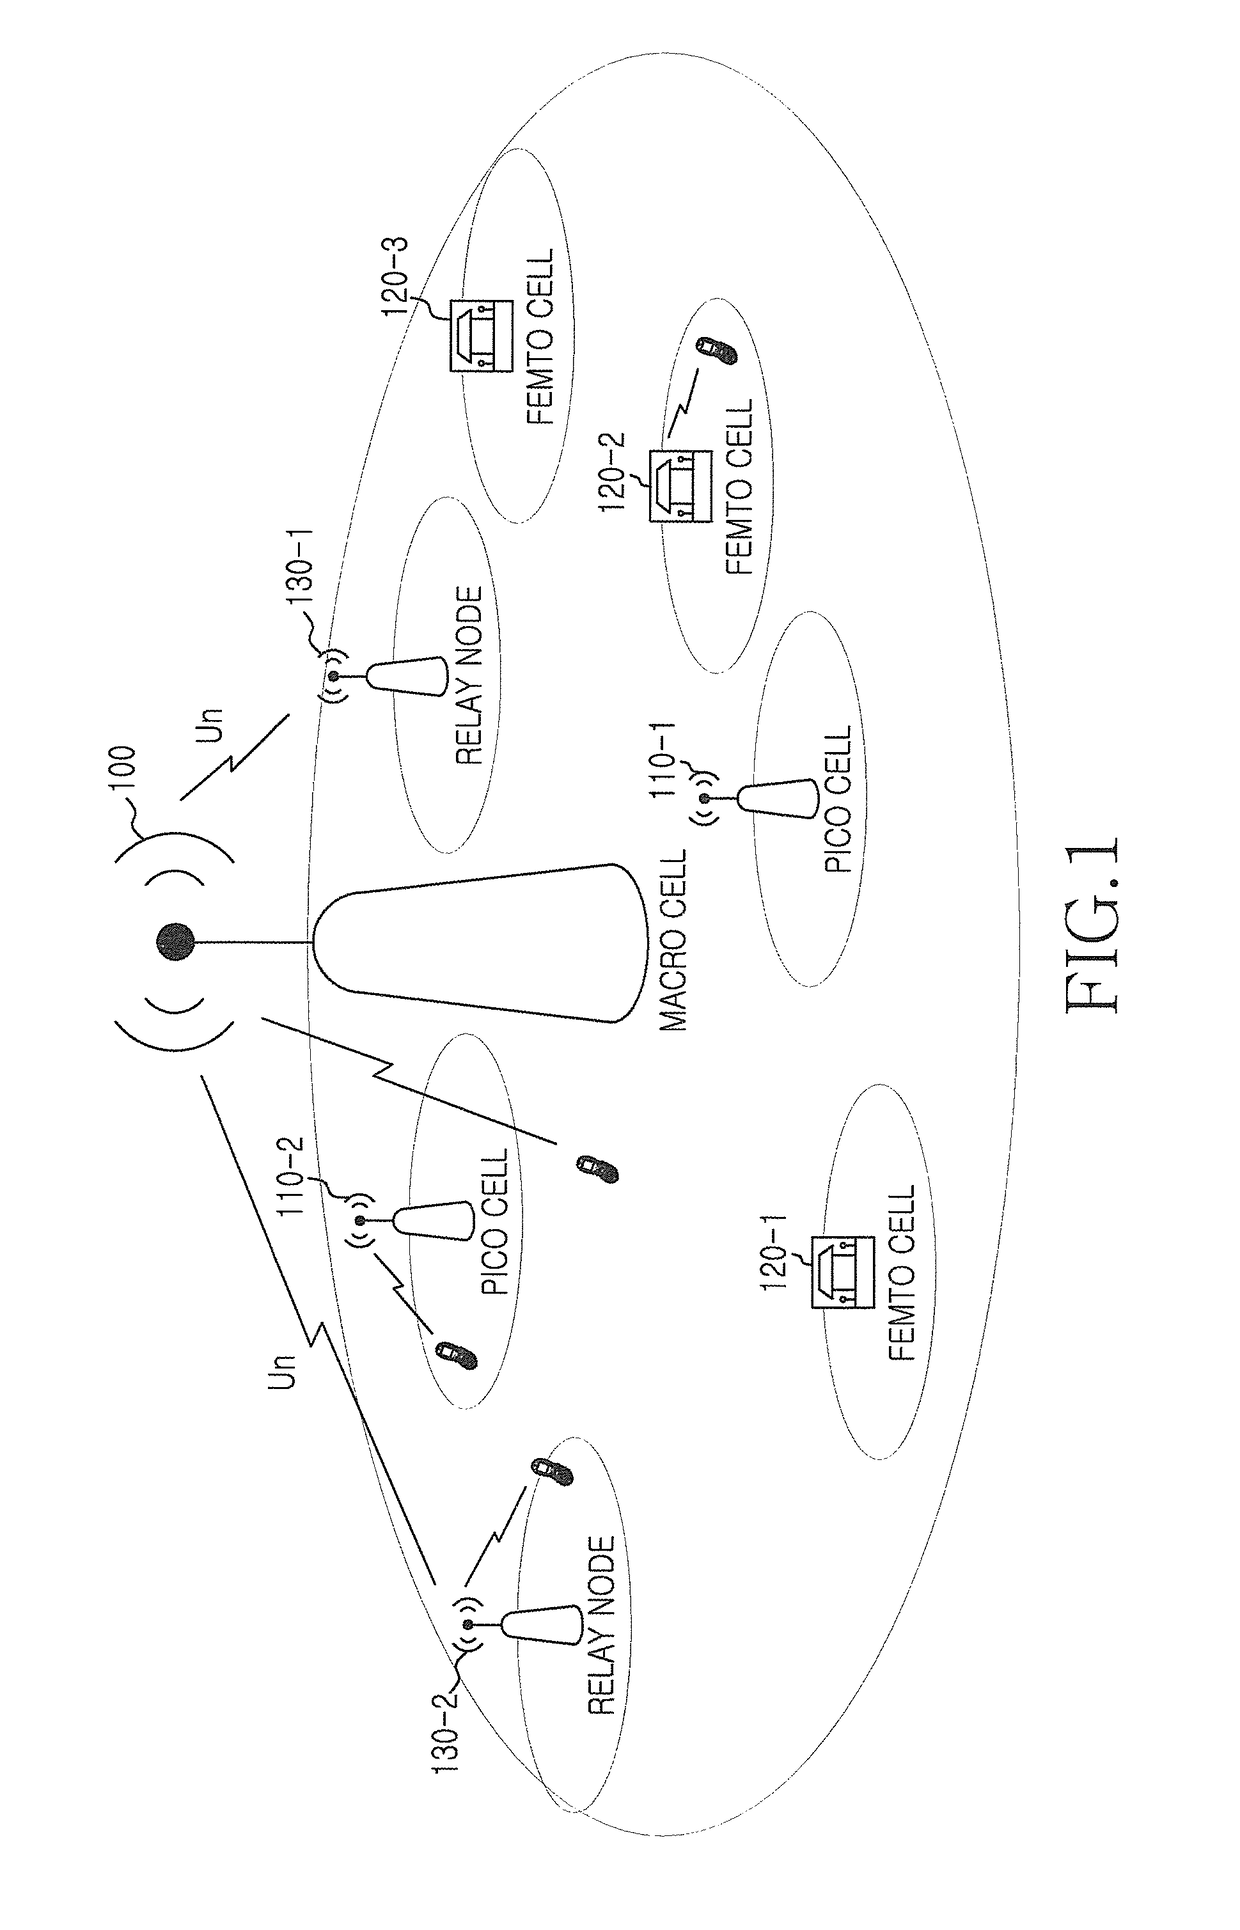 Apparatus and method for supporting mobility in a heterogeneous wireless communication system